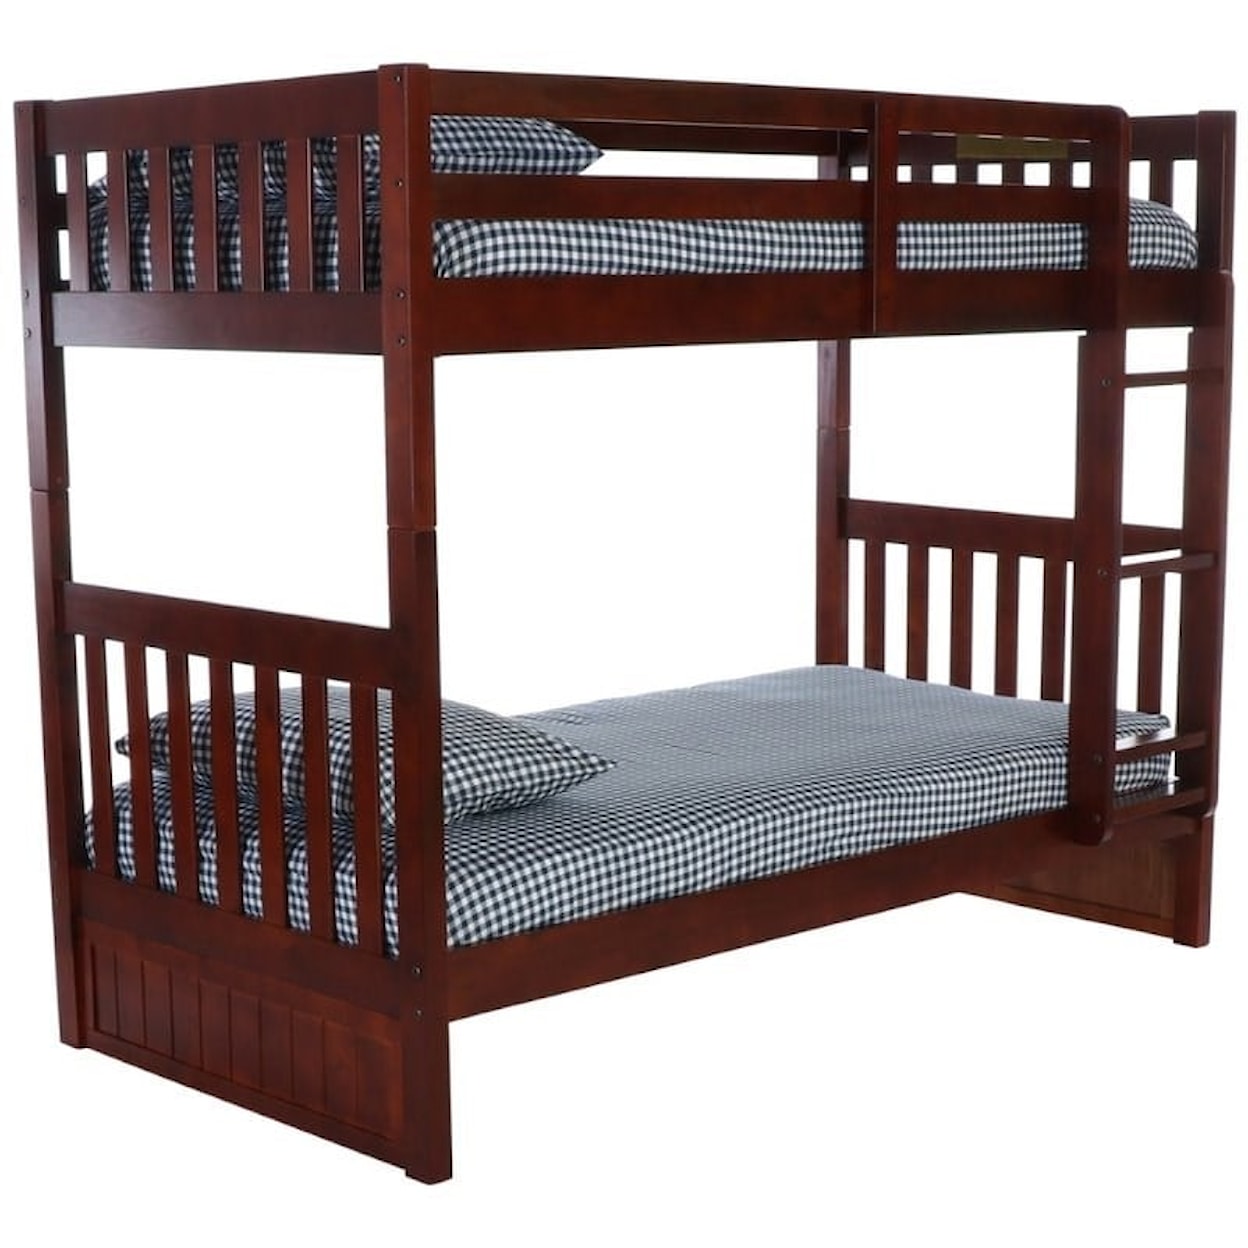 Sam's Furniture Bunk Bed Packages Donco 2810 Twin/Twin Bunkbed with Mattress 